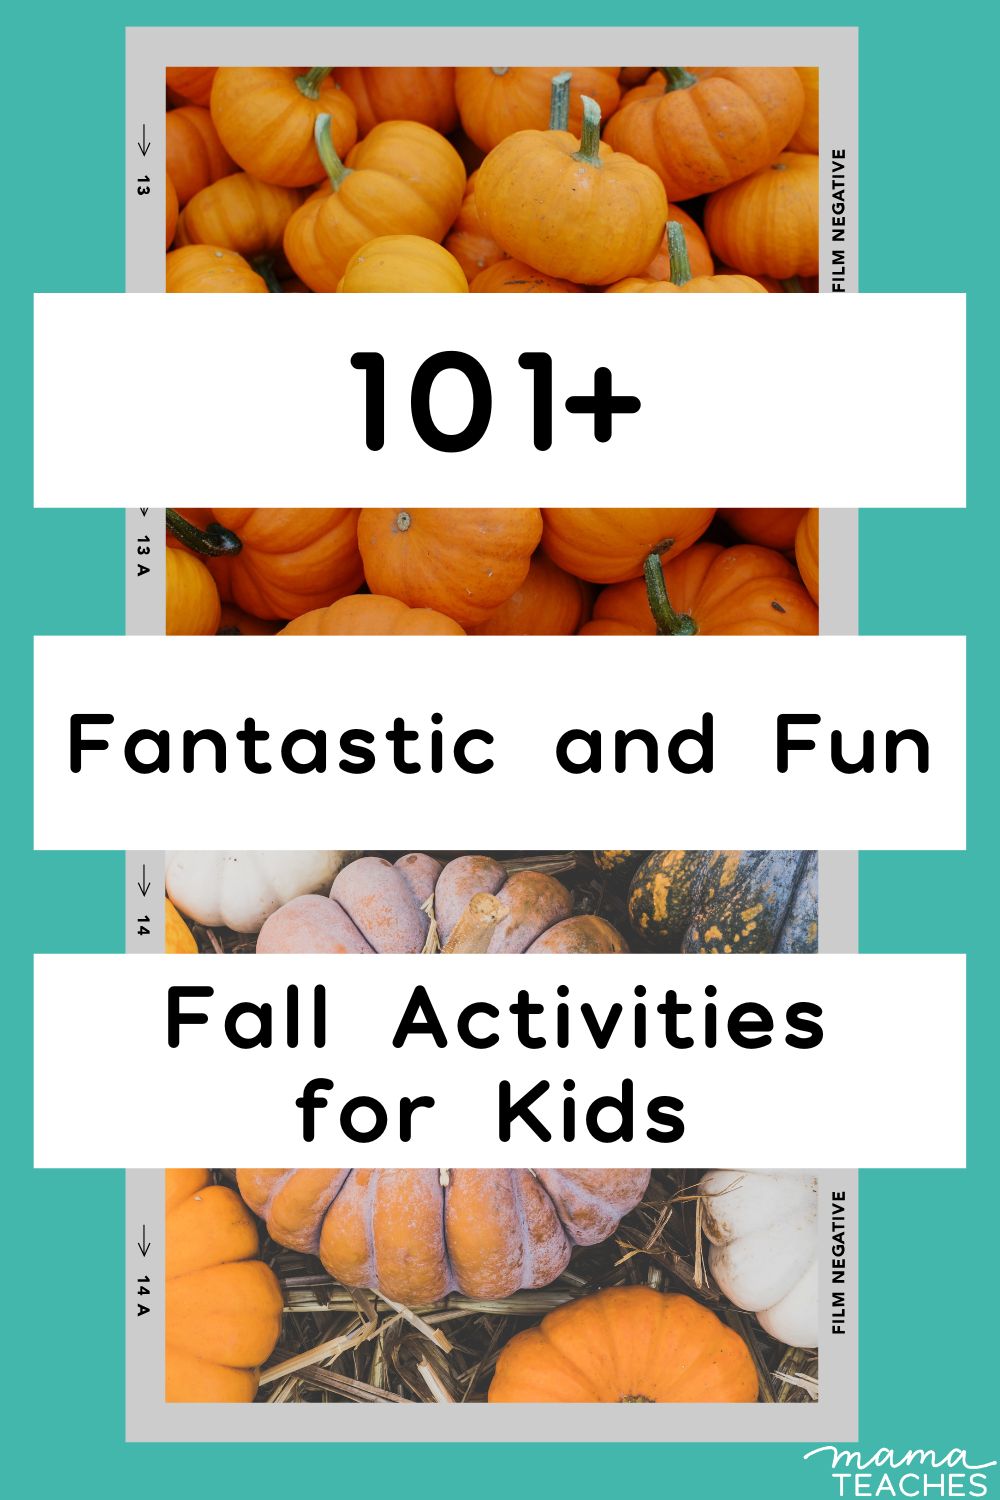 100+ Fantastic and Fun Fall Activities for kIDS